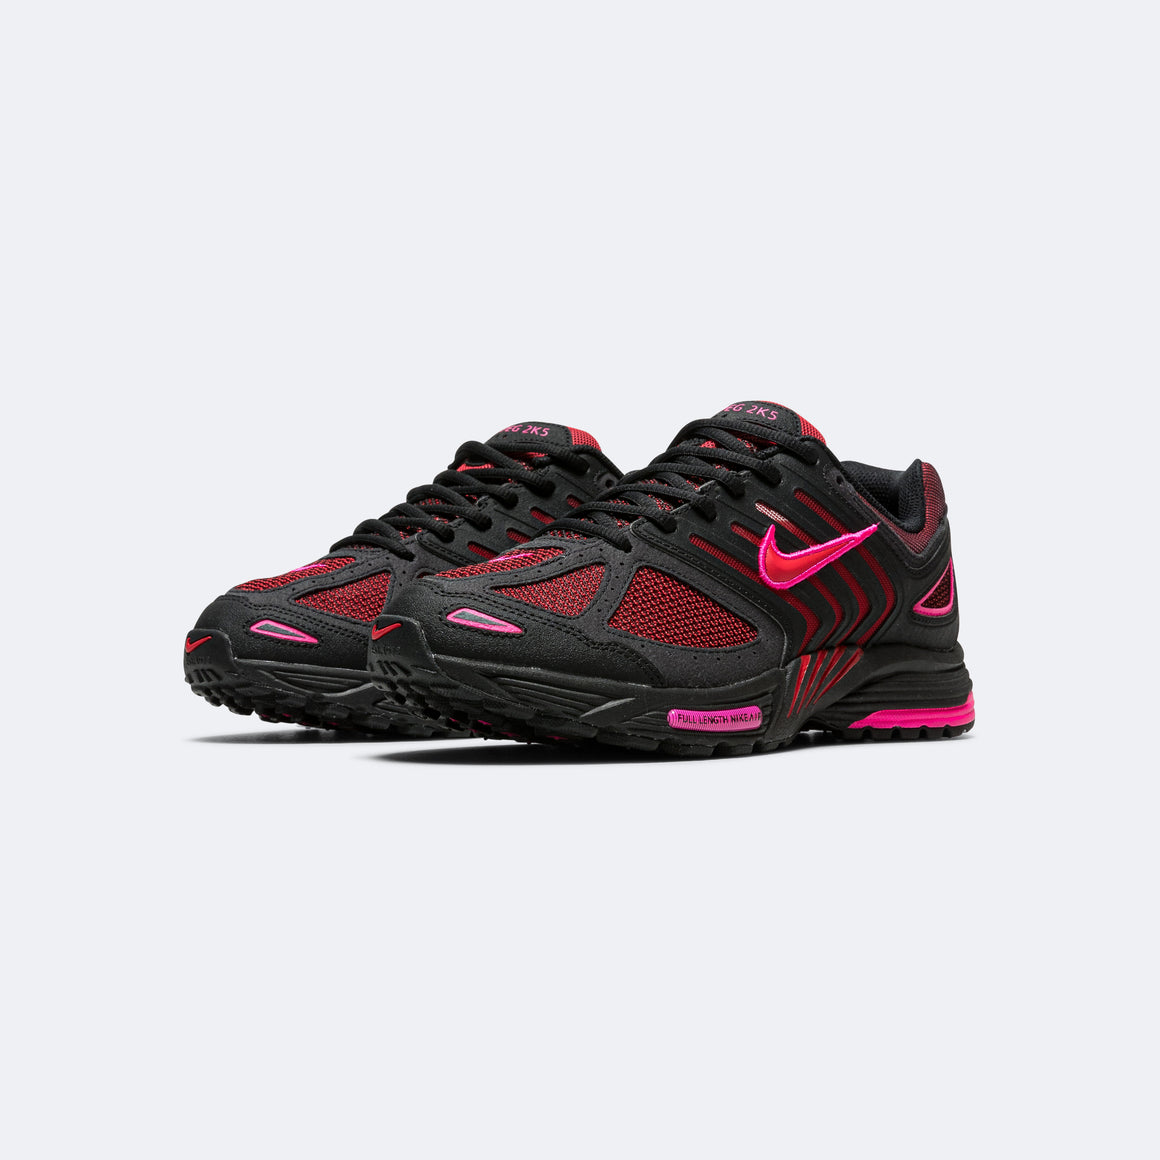 Nike - Air Pegasus 2005 - Black/Fire Red-Fierce Pink - UP THERE